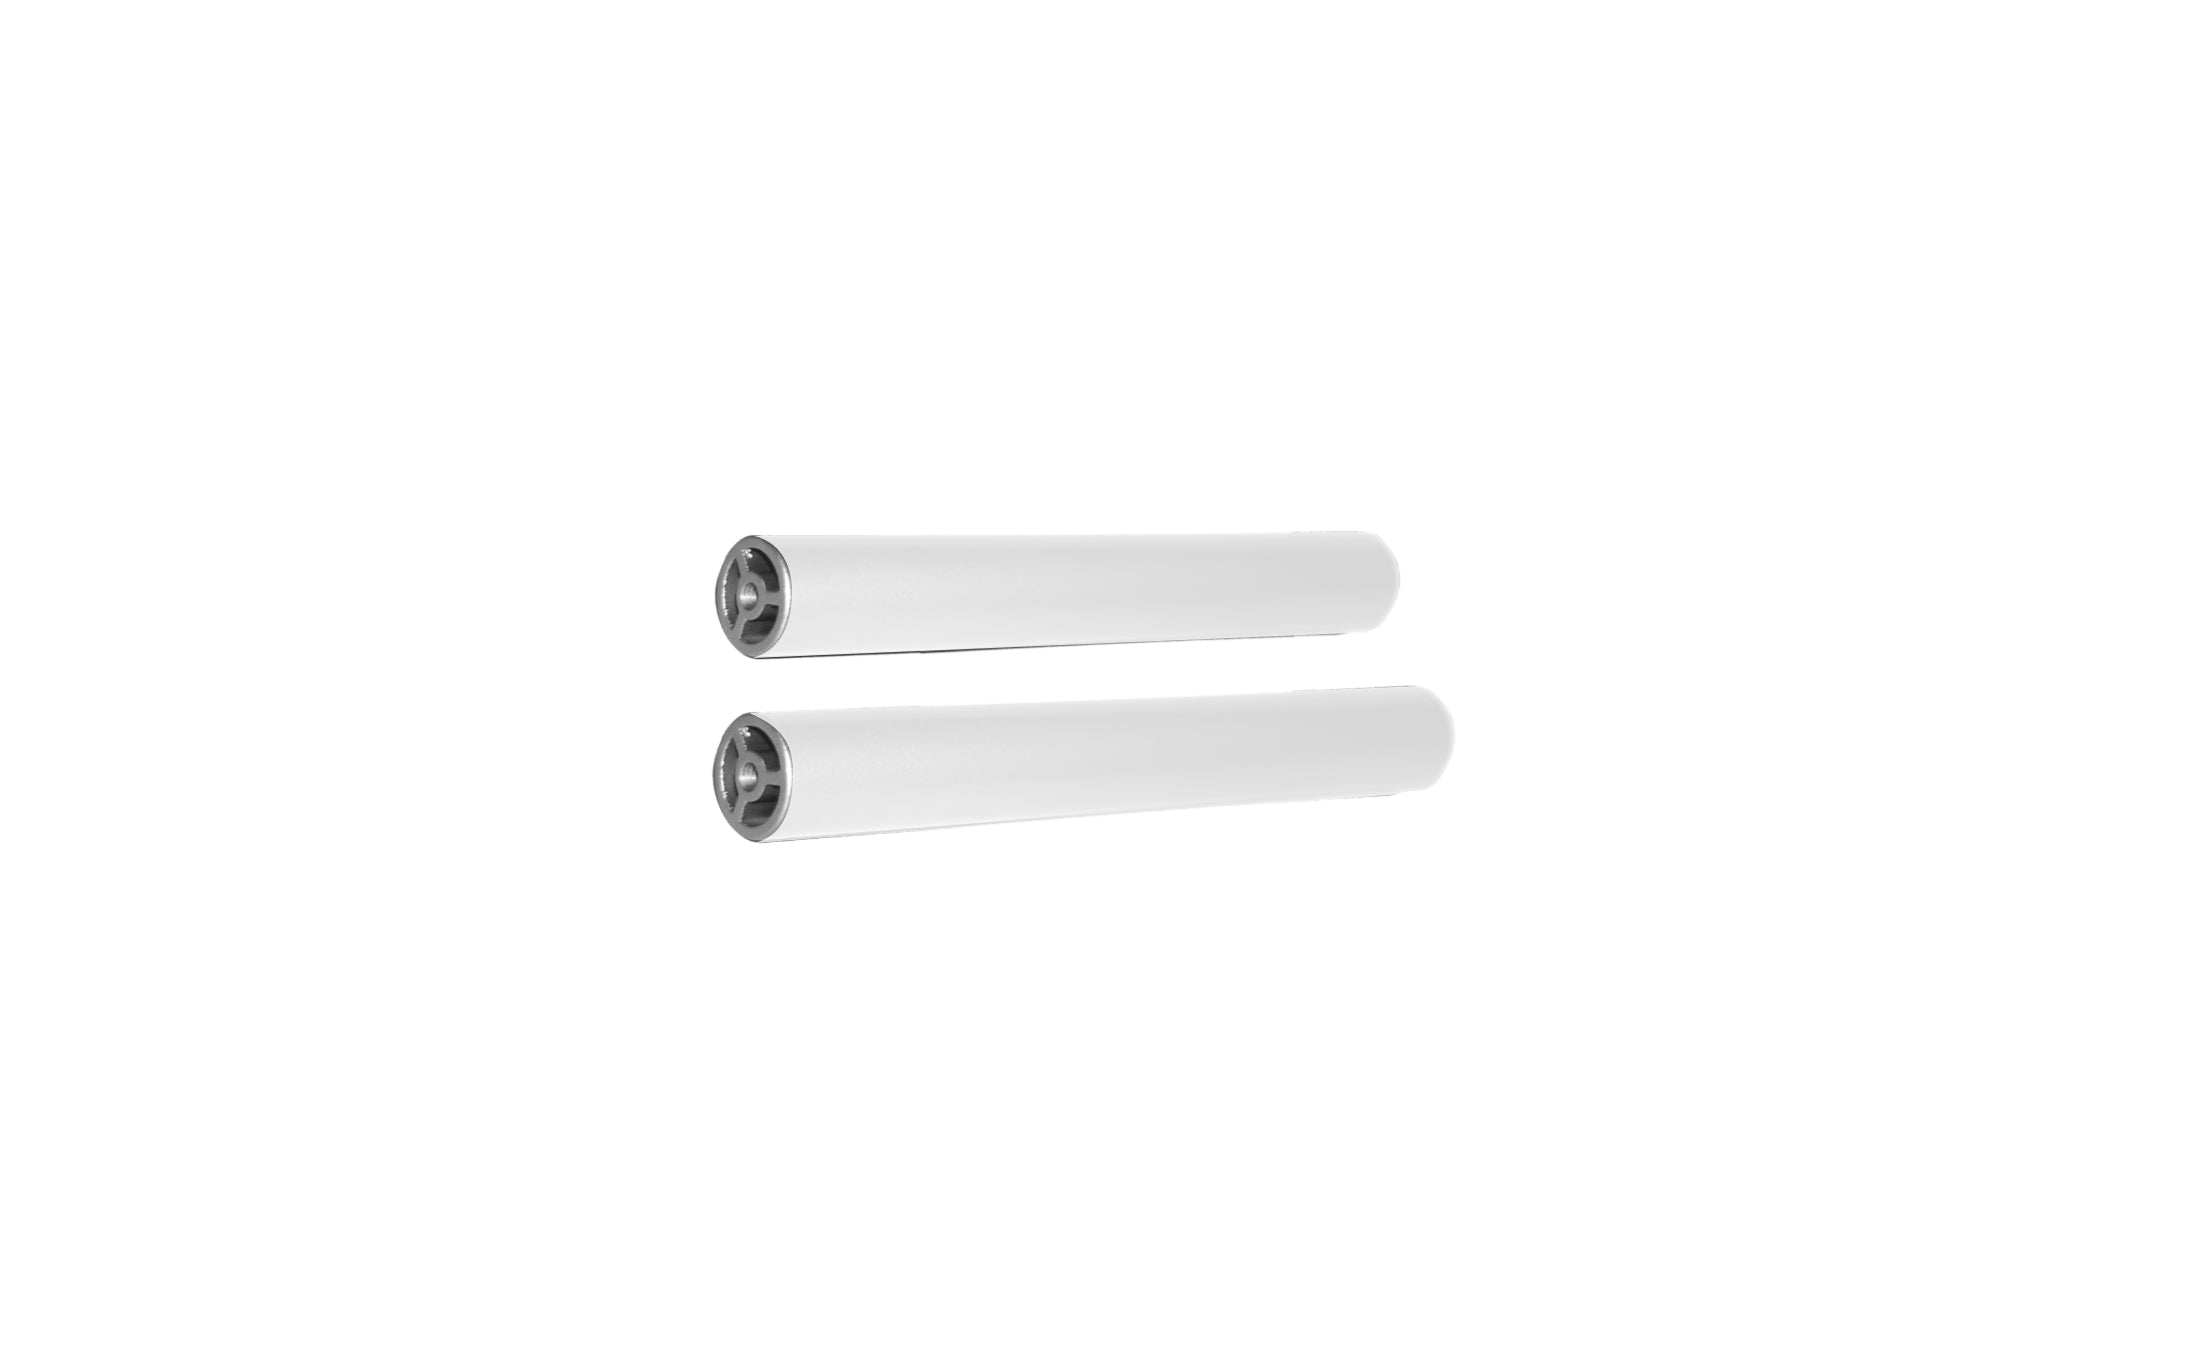 White Heater Extension Rods for Heatscope Heater